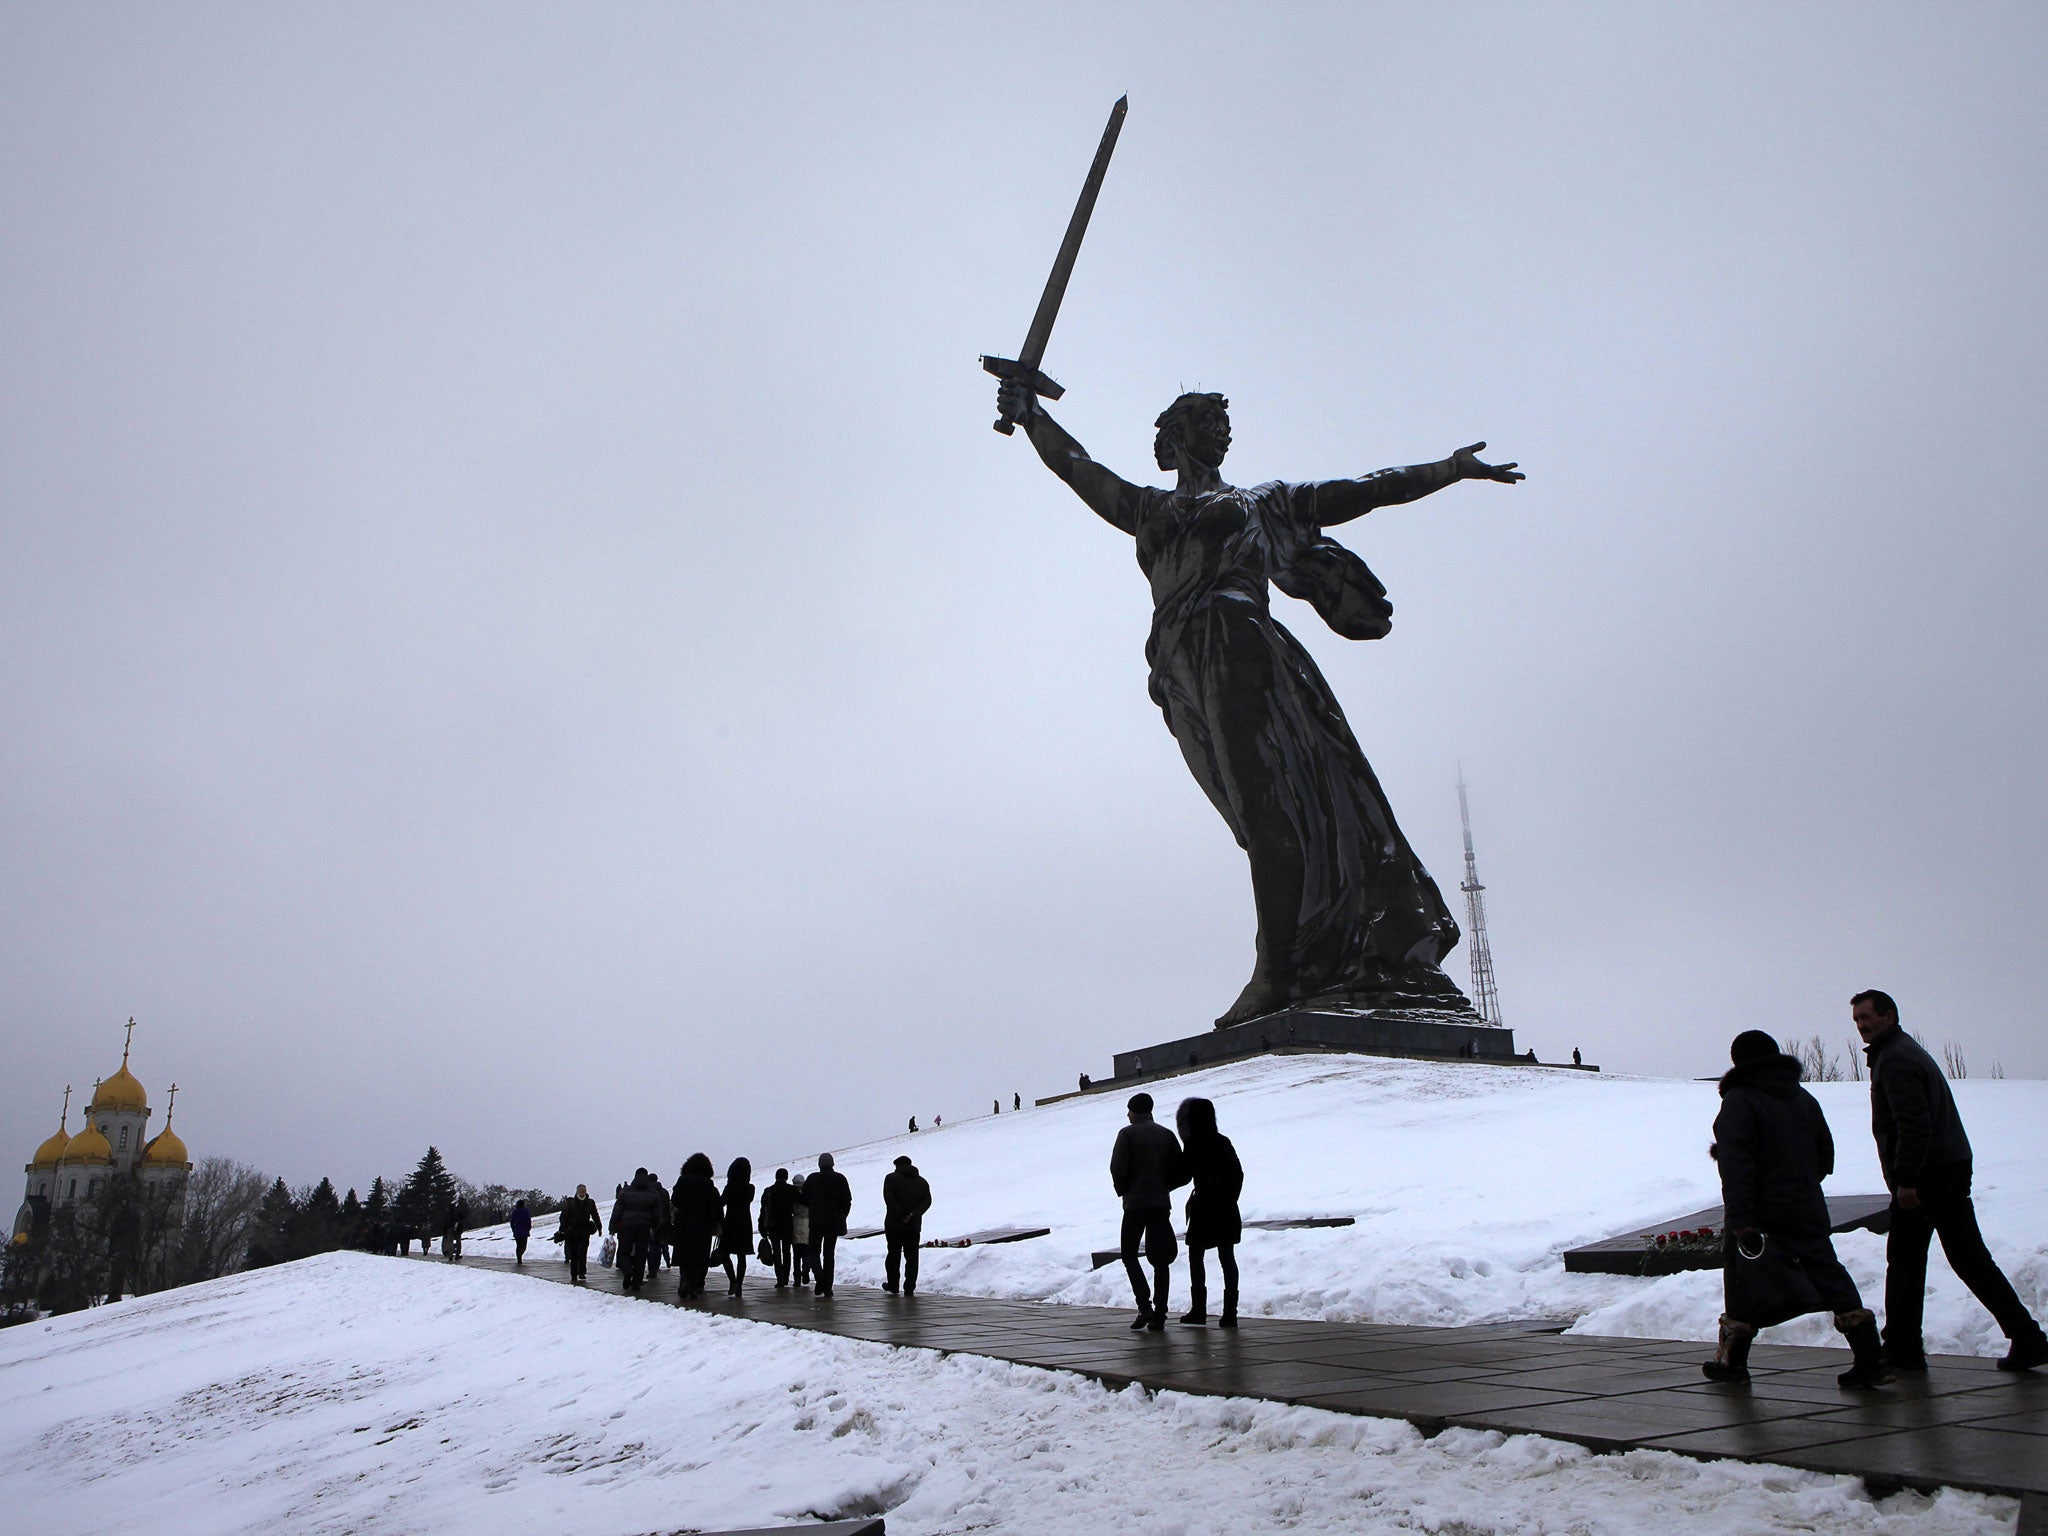 The Mother Russia statue